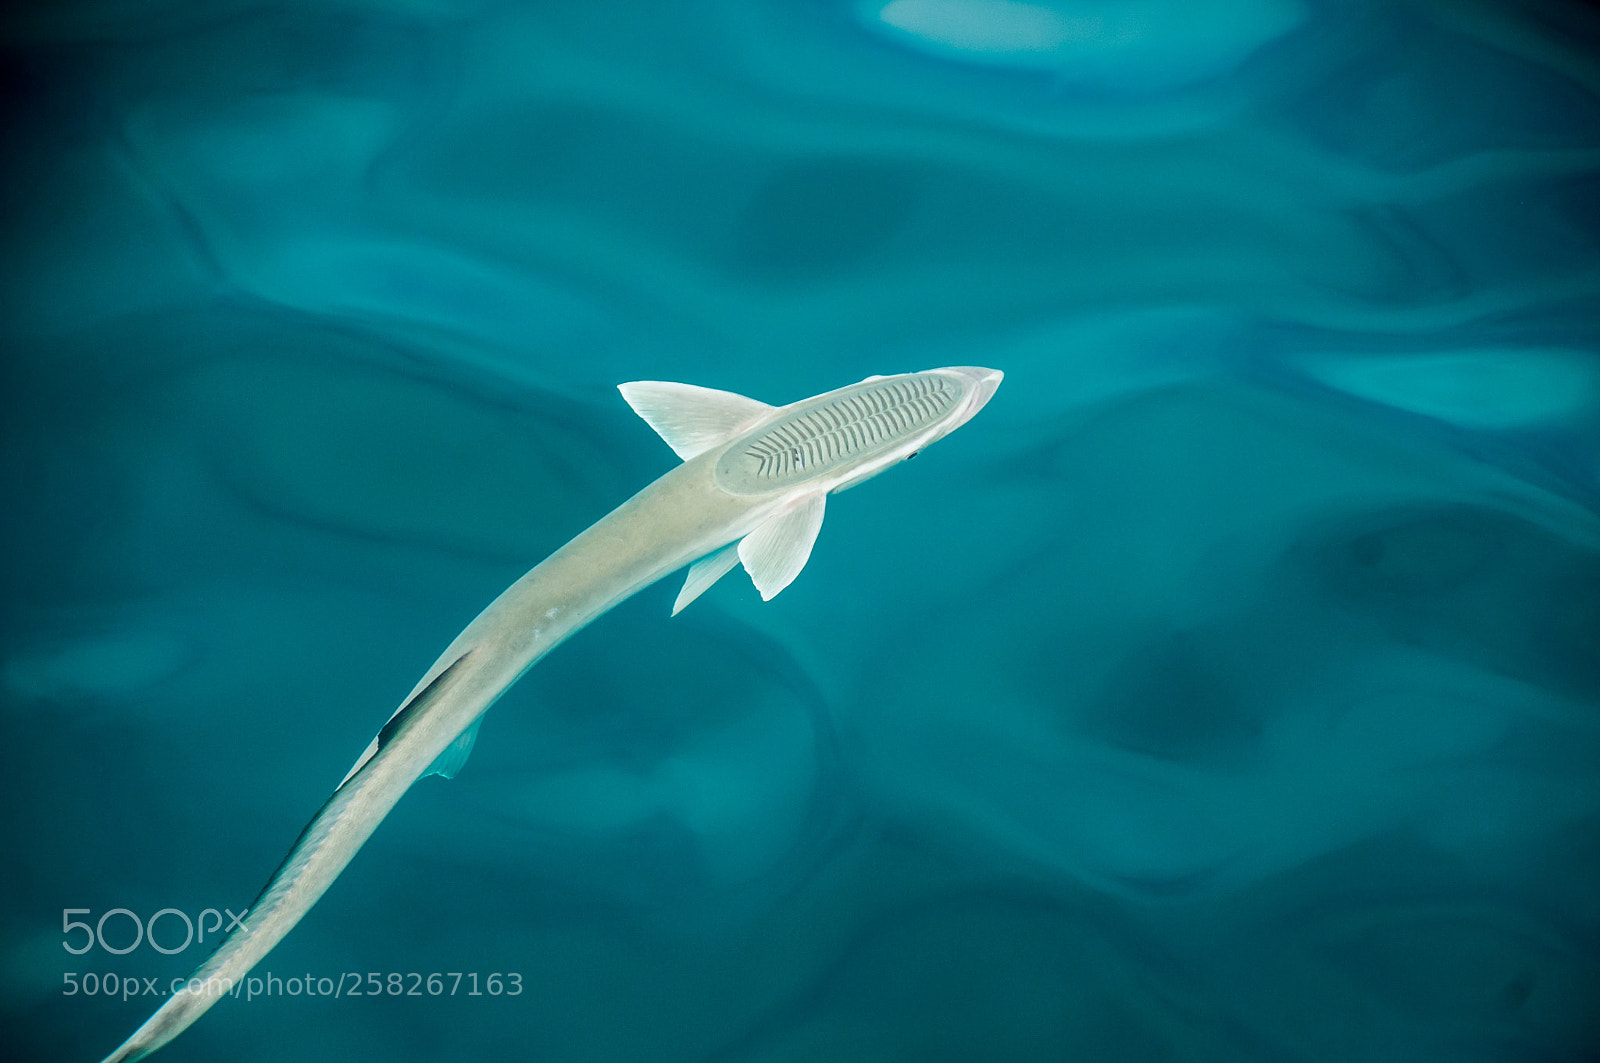 Nikon D300 sample photo. Remora fish in the photography